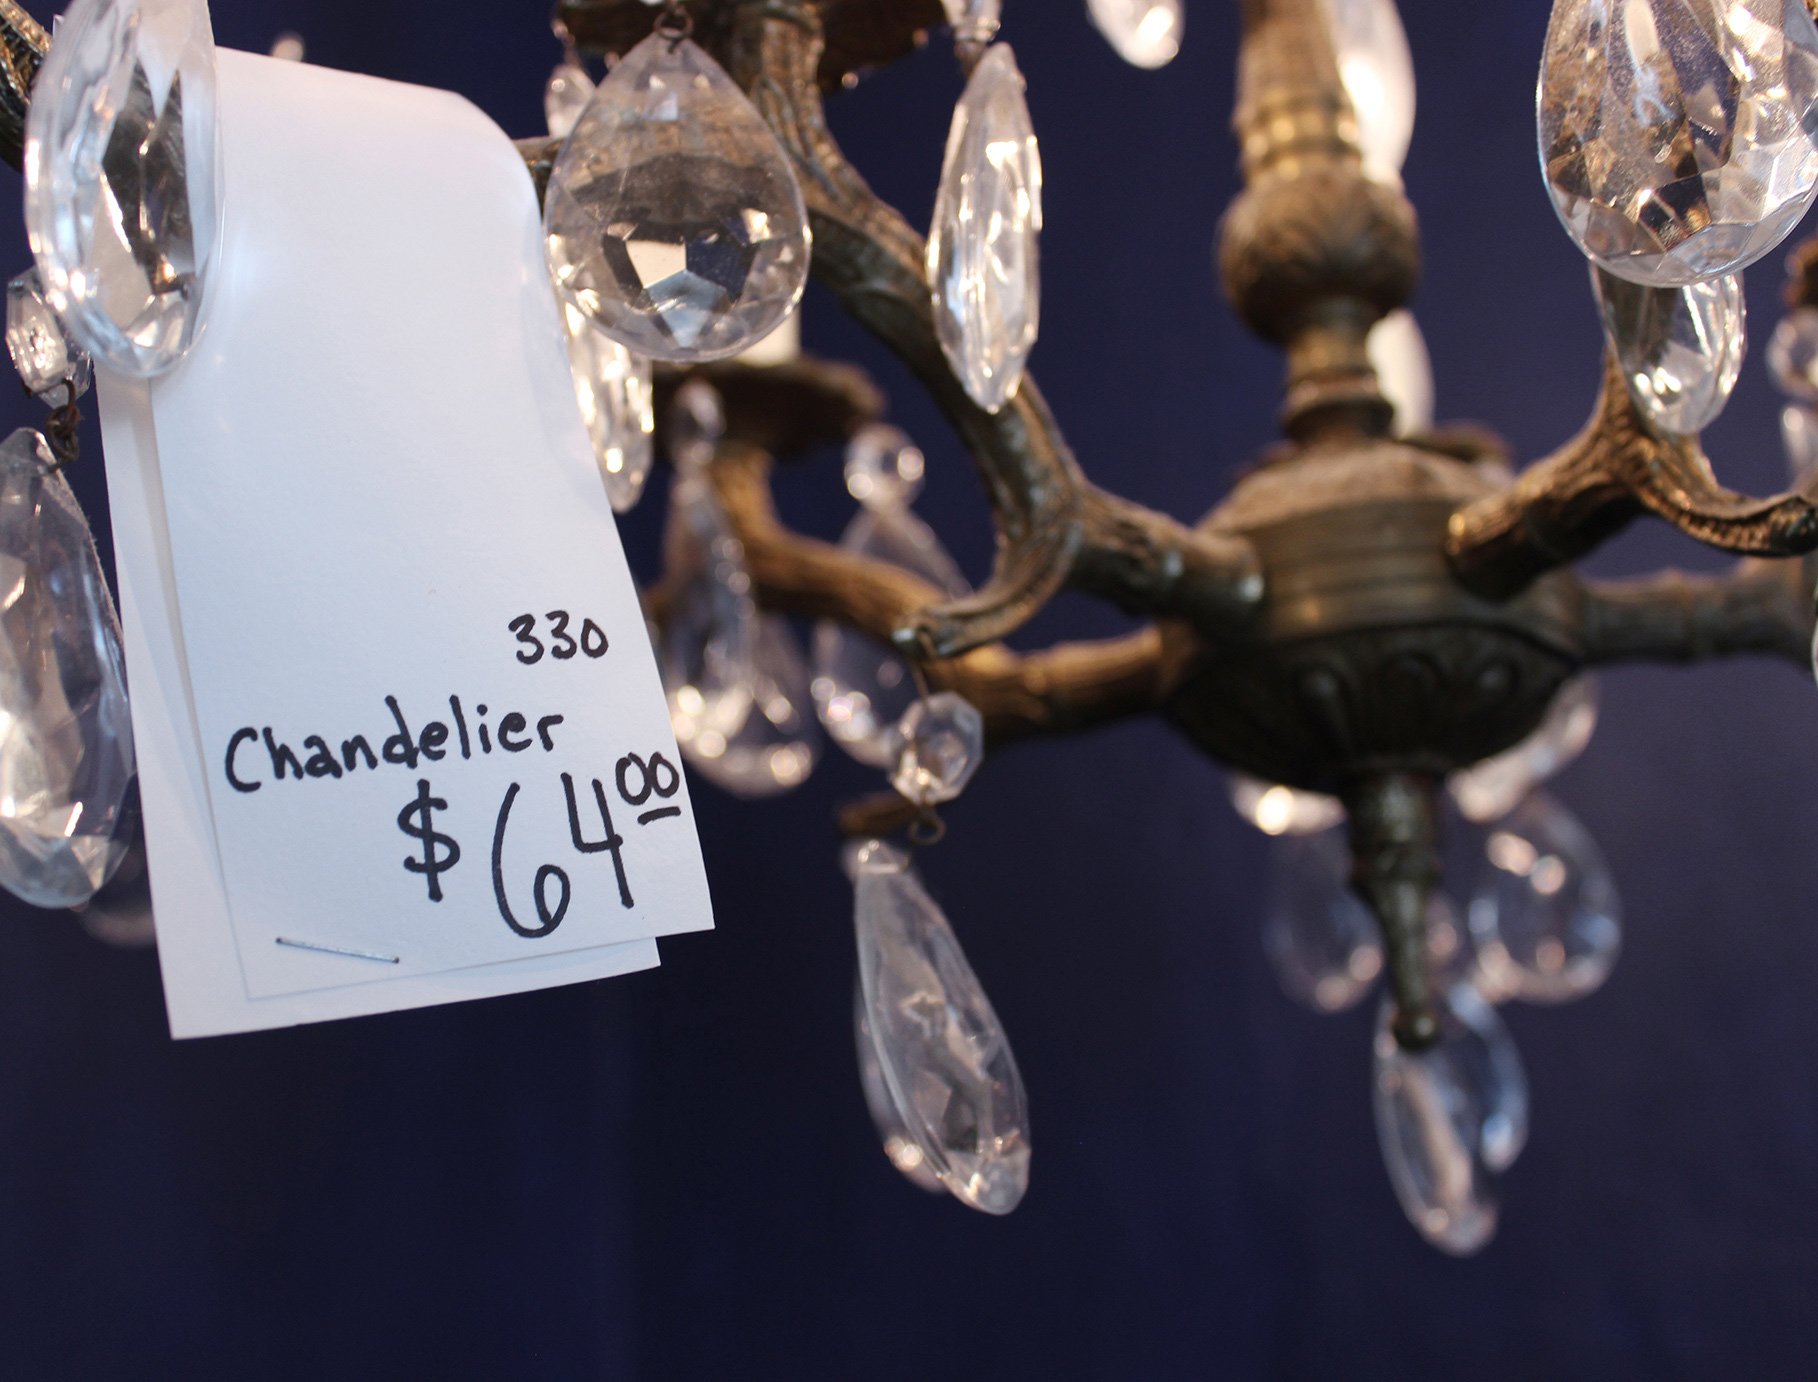 Chandeliers sell well in a flea market, large pricetags discourage excessive handling of these fragile items.